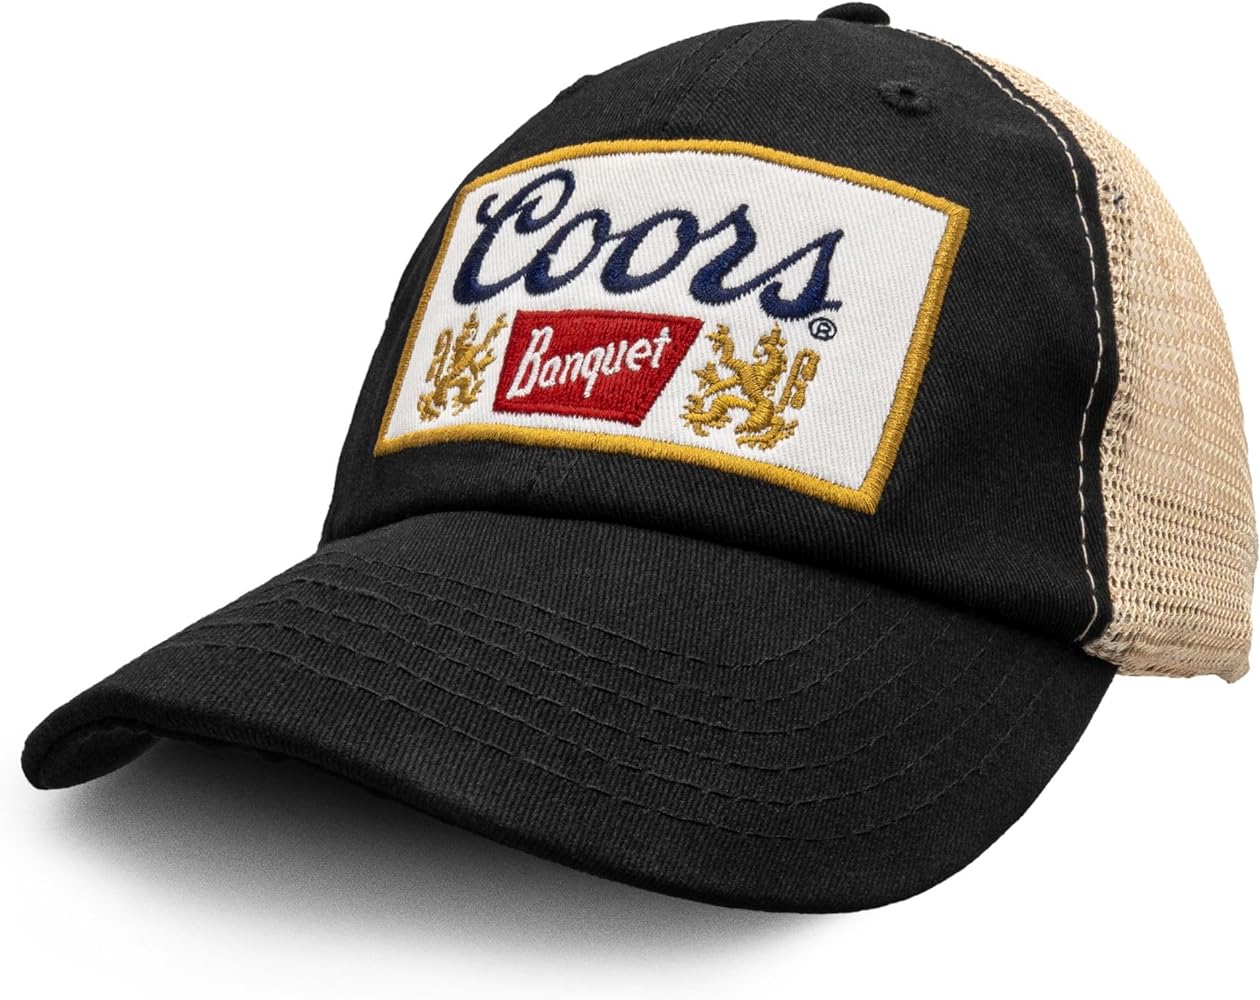 Tee Luv Coors Banquet Hat Review